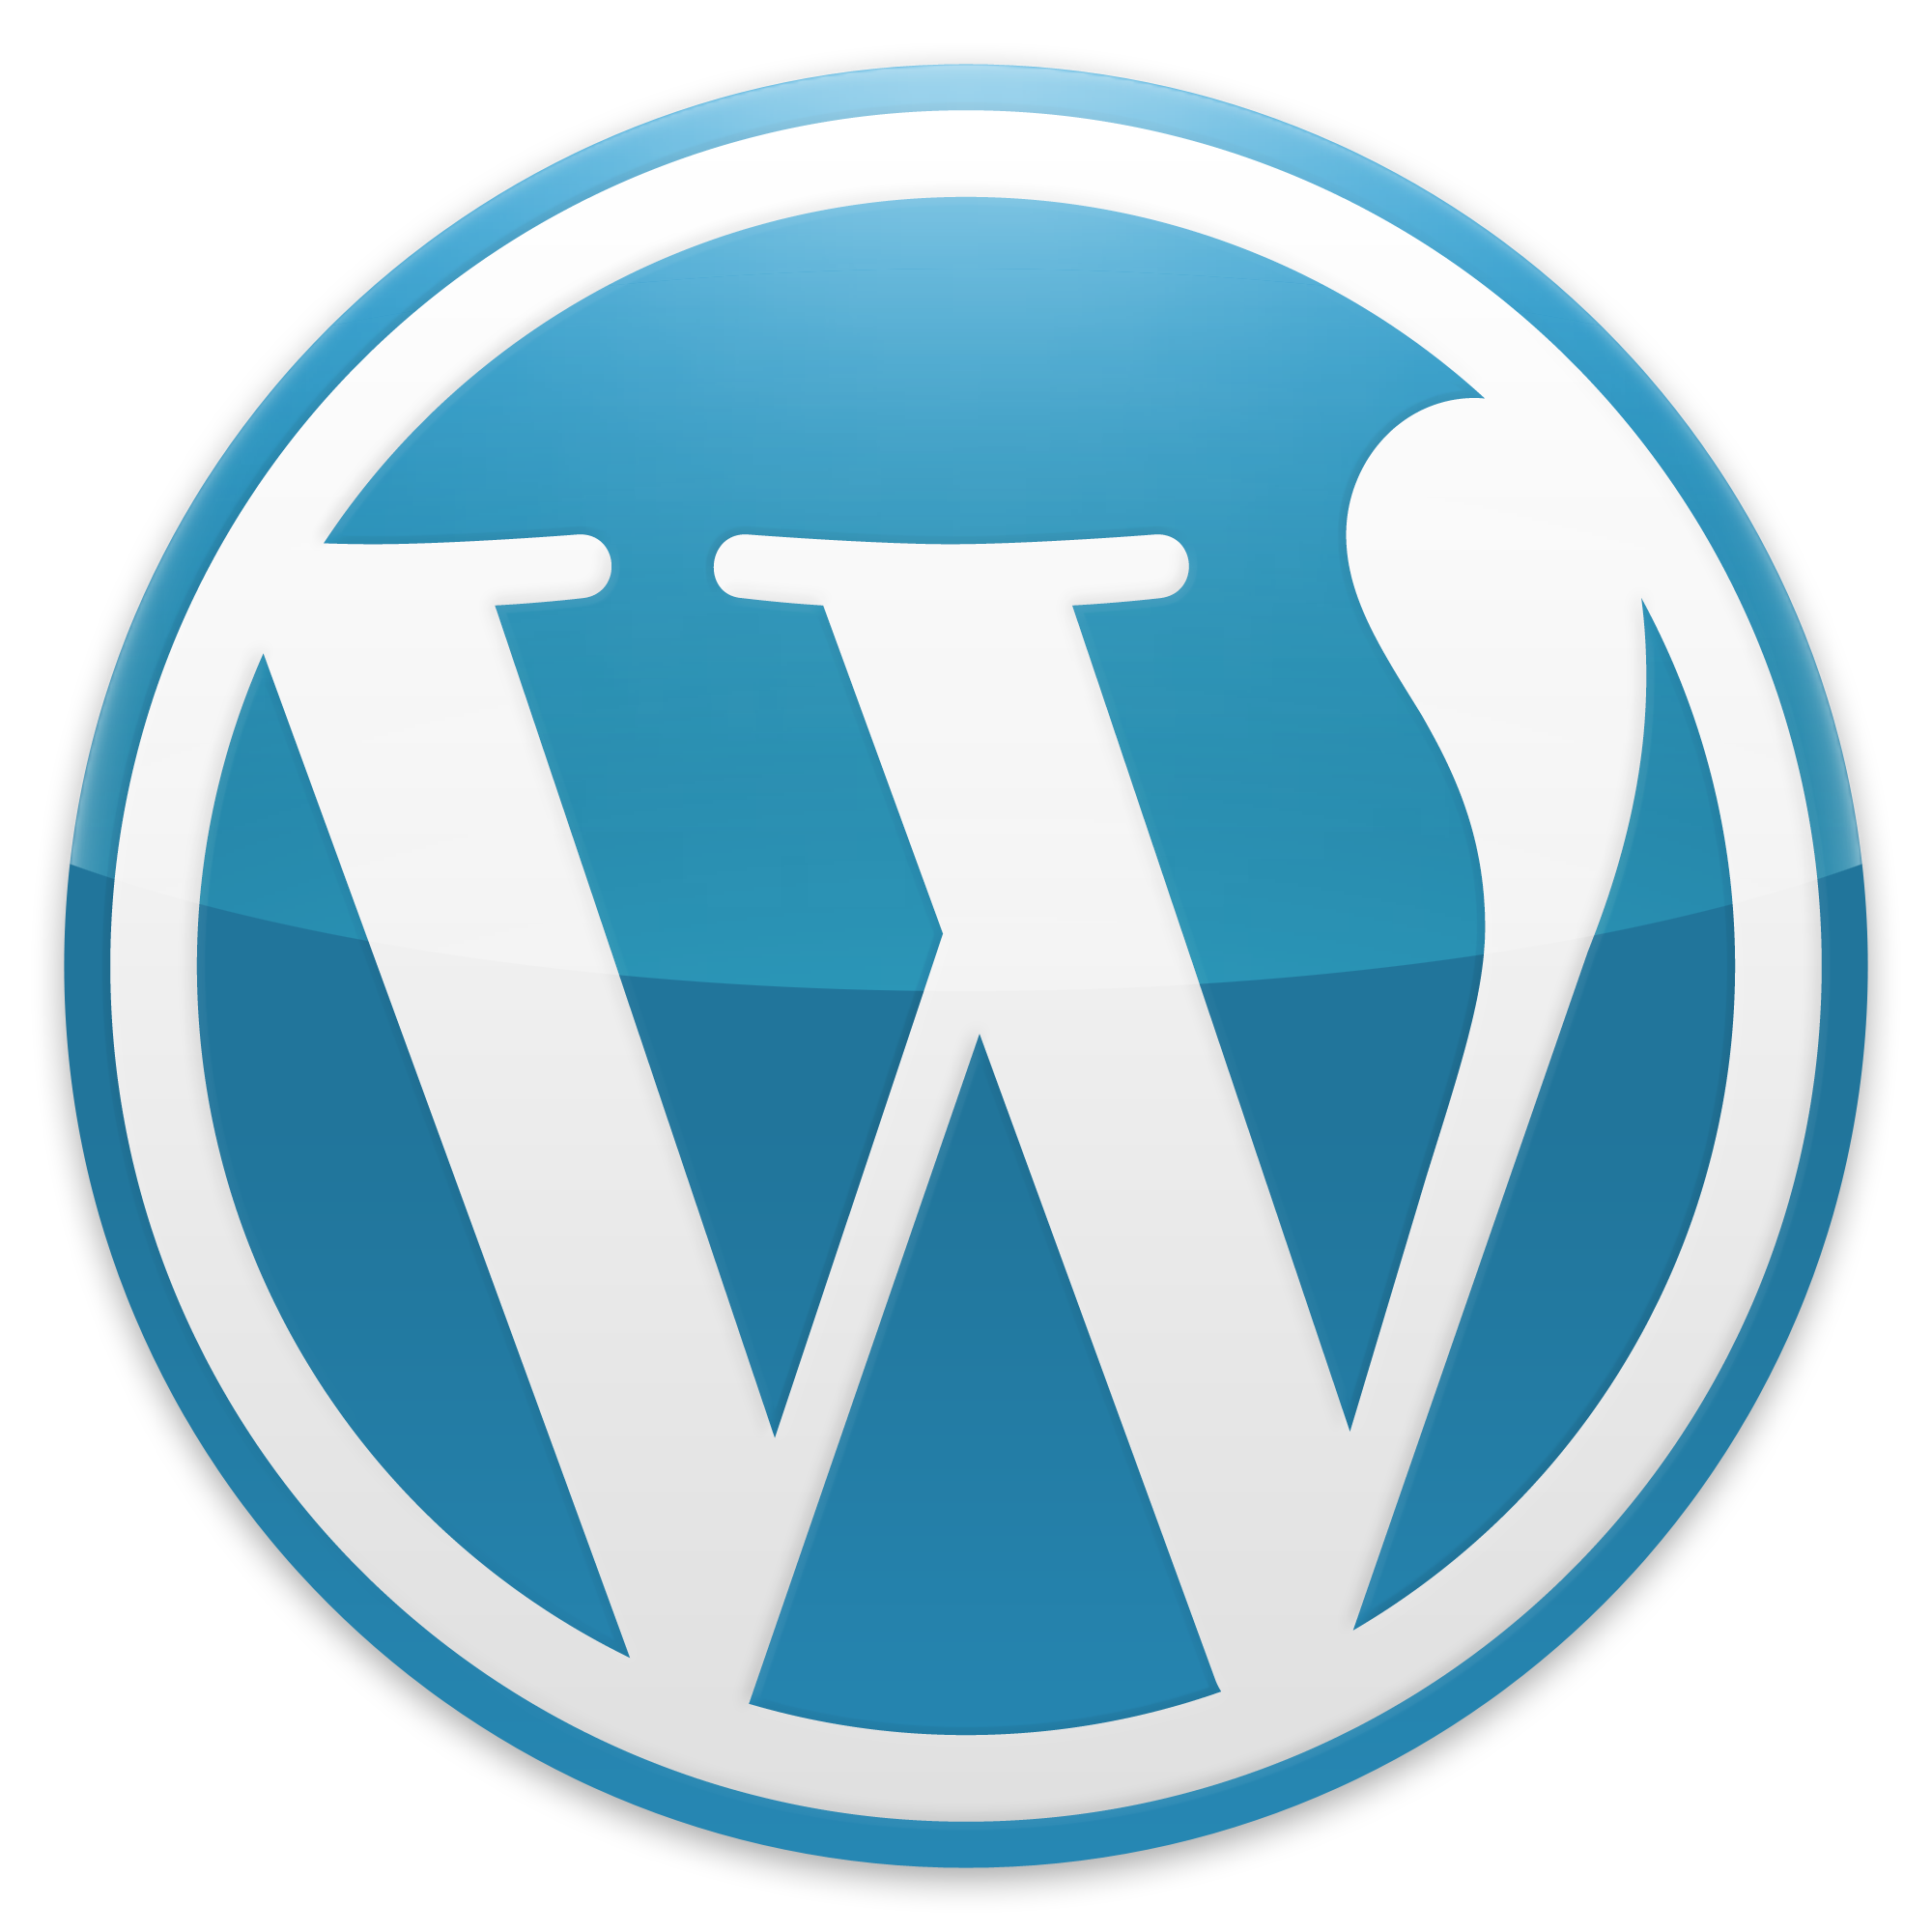 Increase the max file upload size in Wordpress